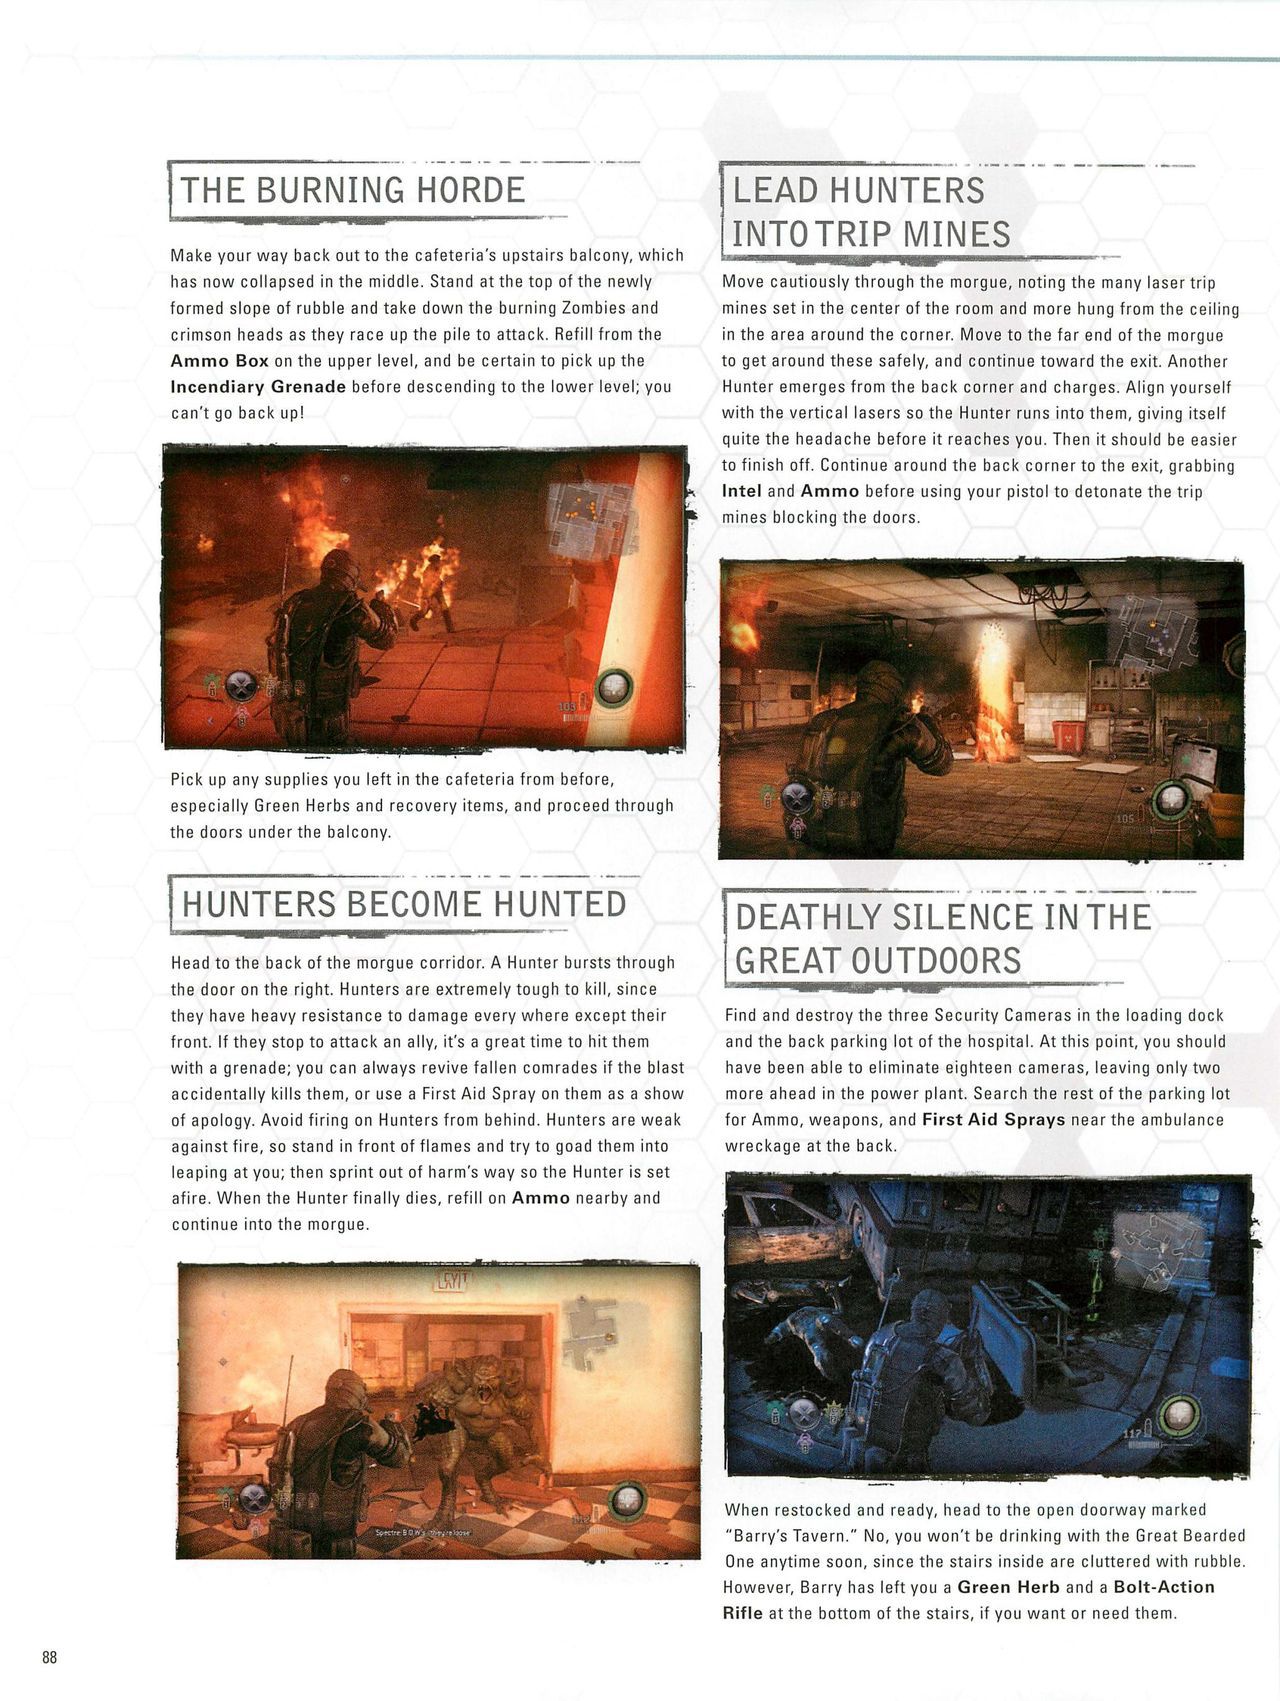 Resident Evil: Operation Raccoon City Official Strategy Guide (watermarked) 90